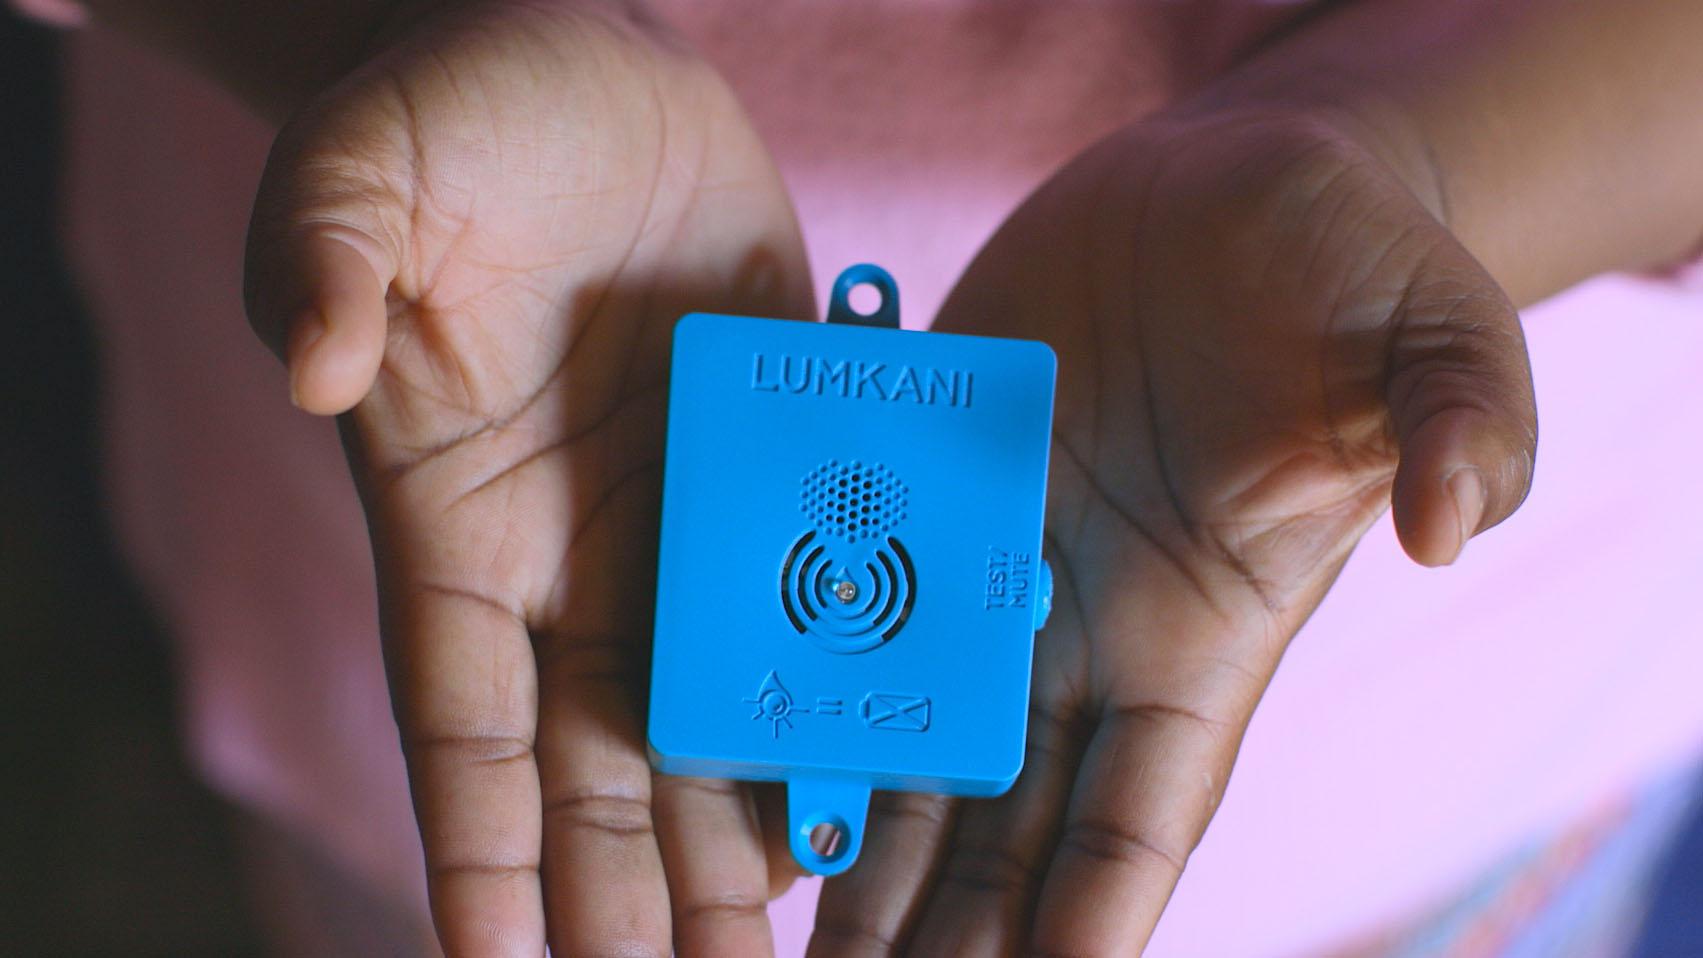 An engineering professor in South Africa challenged his students to come up with a way to prevent devastating shack fires that displace thousands. One of them came up with this fire detector, Lumkani, that can alert a neighborhood.